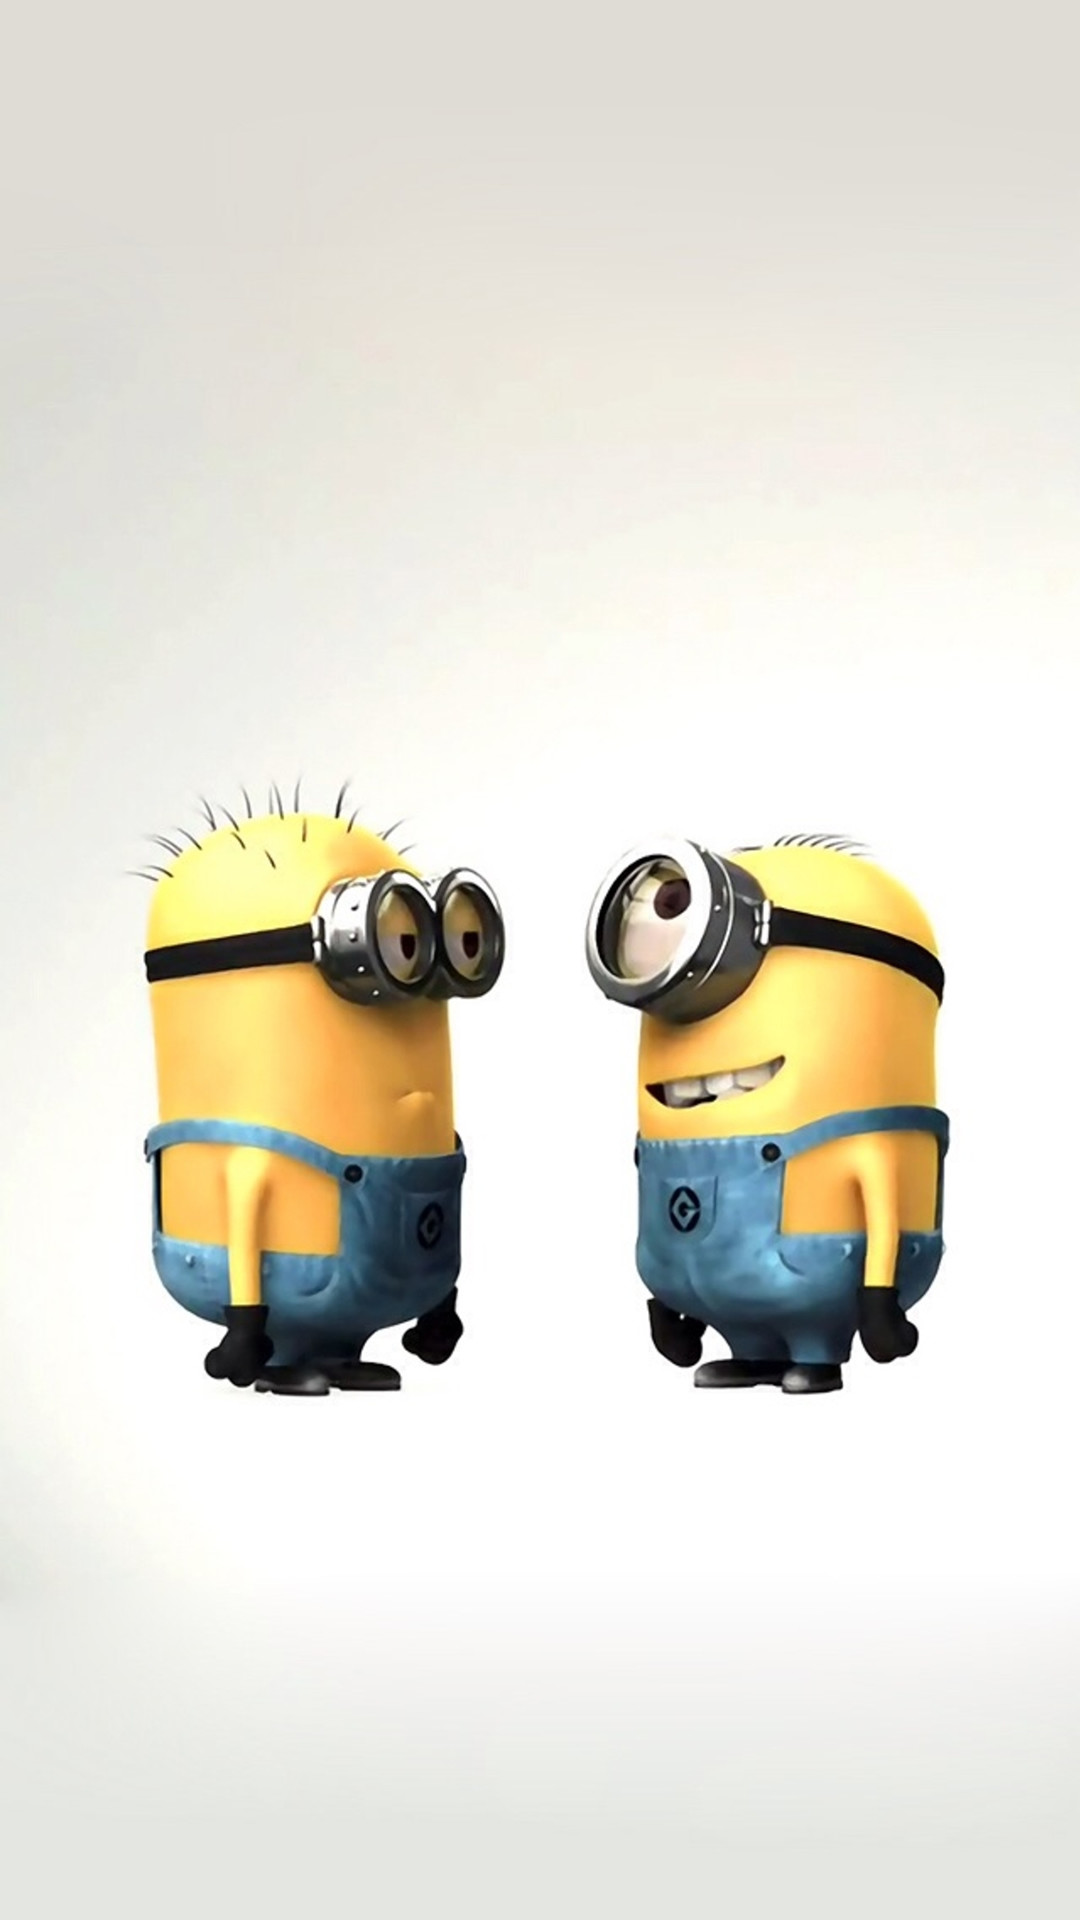 1080x1920 ... funny cute lovely minion couple iphone 8 wallpaper download ...